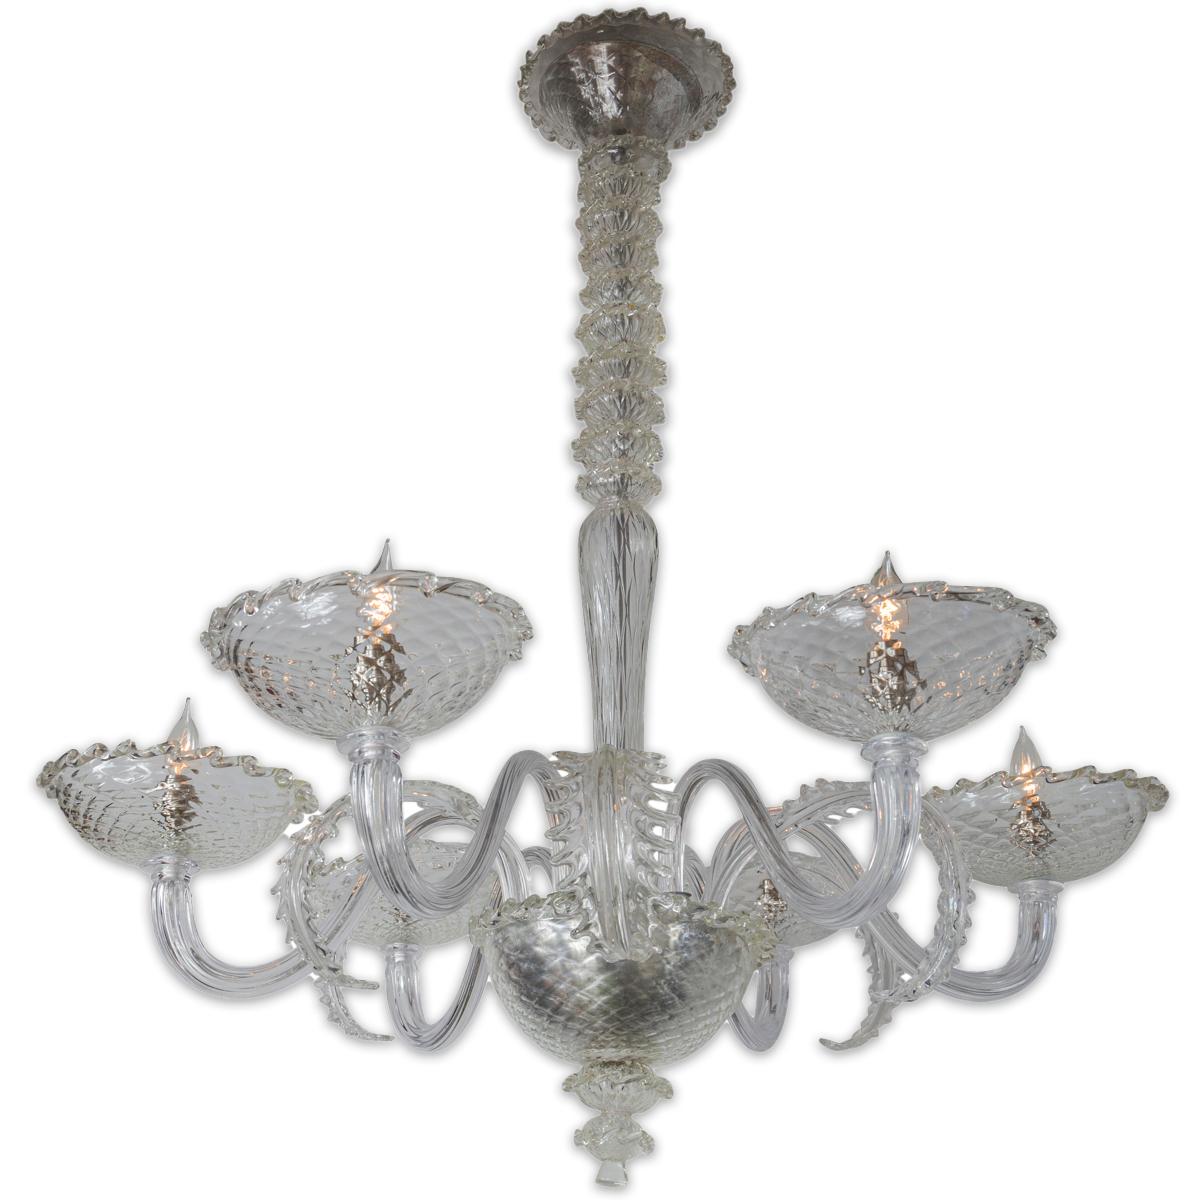  A stunning sleek crystal clear and iridescent blown chandelier with an exquisite center shaft composed of ten spherical mouth blown balls above a tapered stem upholding  six outreaching reeded blown arms above six deep bobeches adorned with frilly